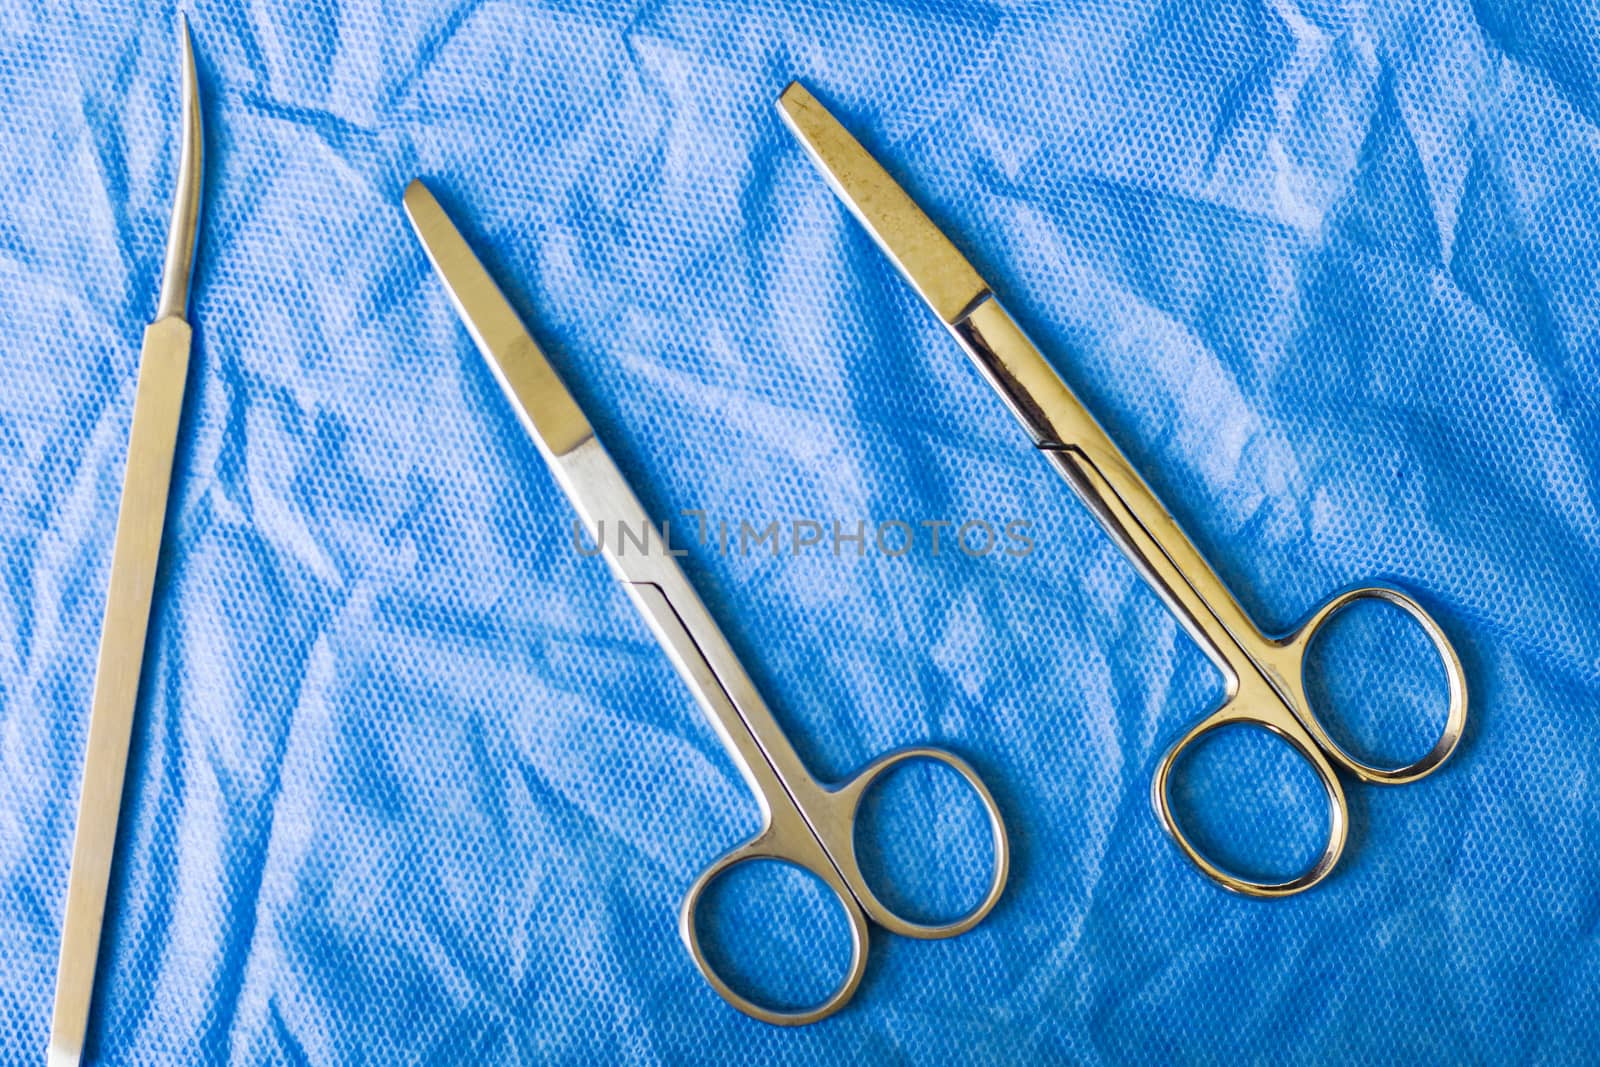 Surgical scissors on the blue sterile table by Taidundua